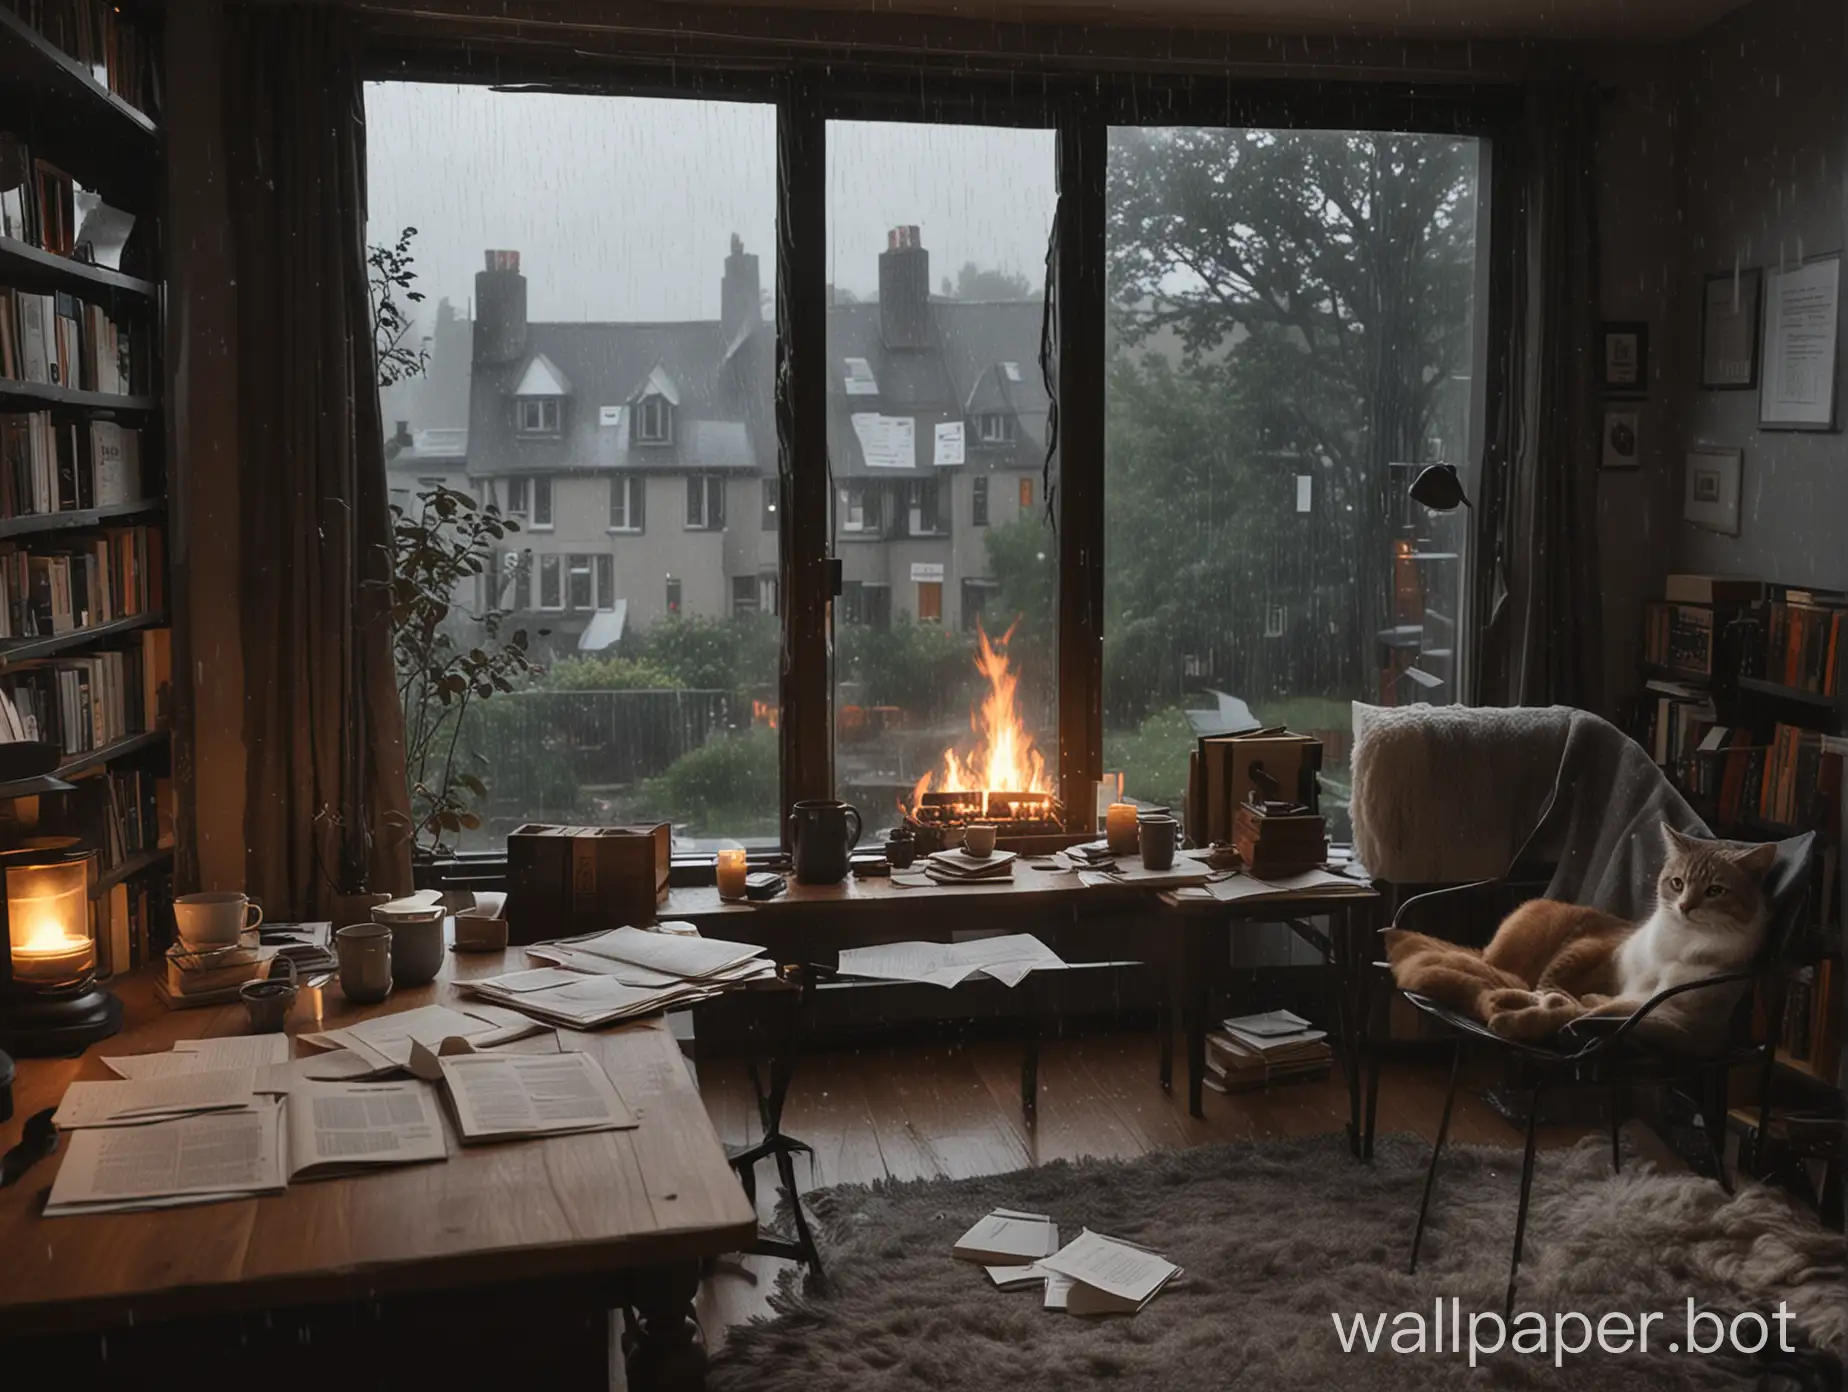 room with study table with papers and notes and study material and coffee on it, window where it is really dark outside and raining, fireplace lit with fire, chair in front of desk, bean bags, grey colored cat and bookshelf